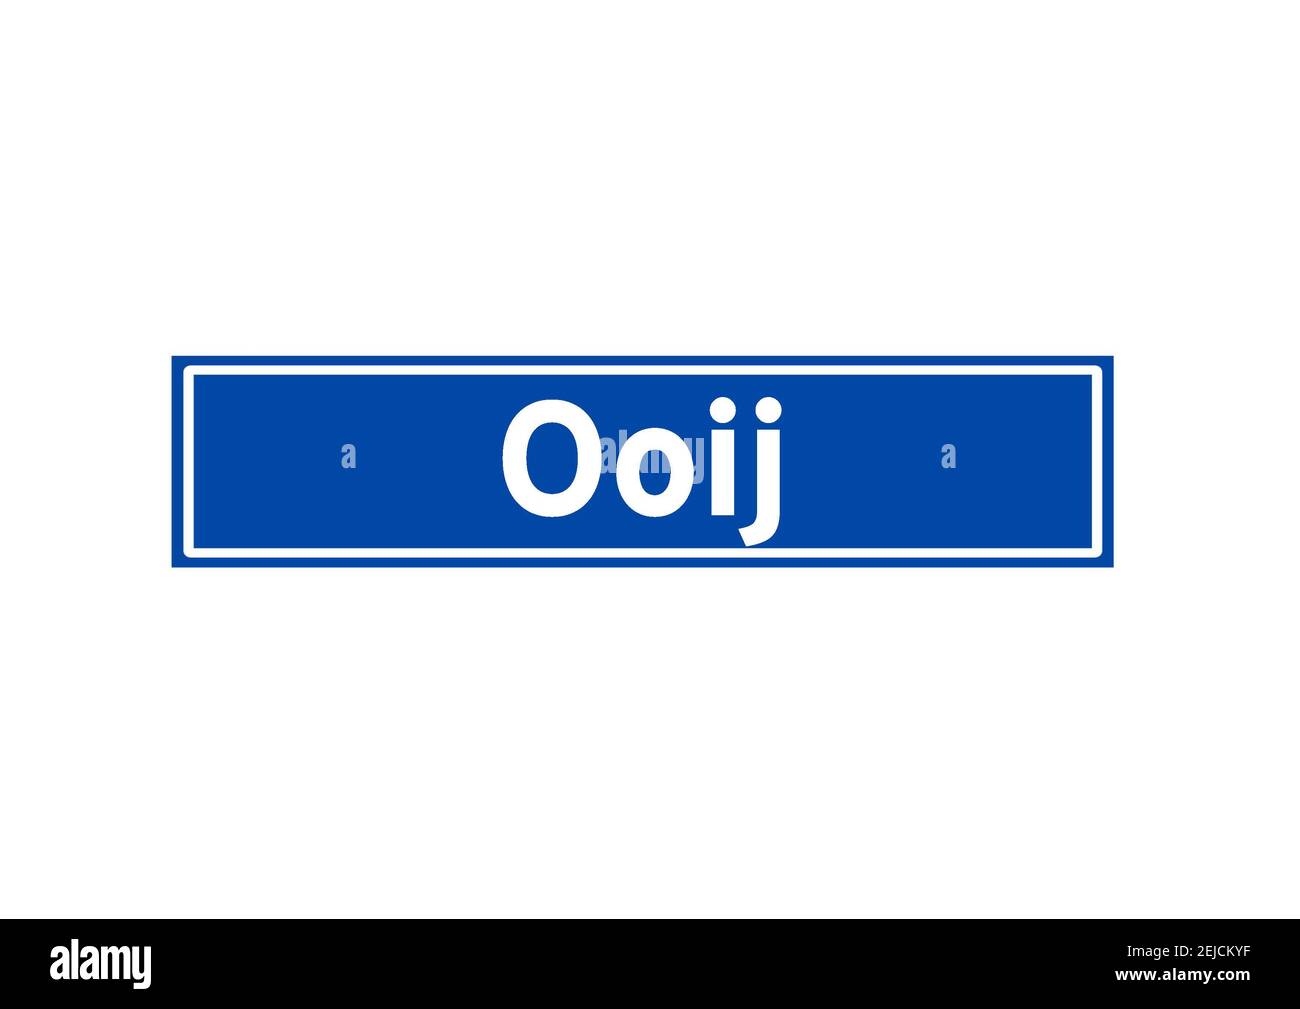 Ooij isolated Dutch place name sign. City sign from the Netherlands. Stock Photo